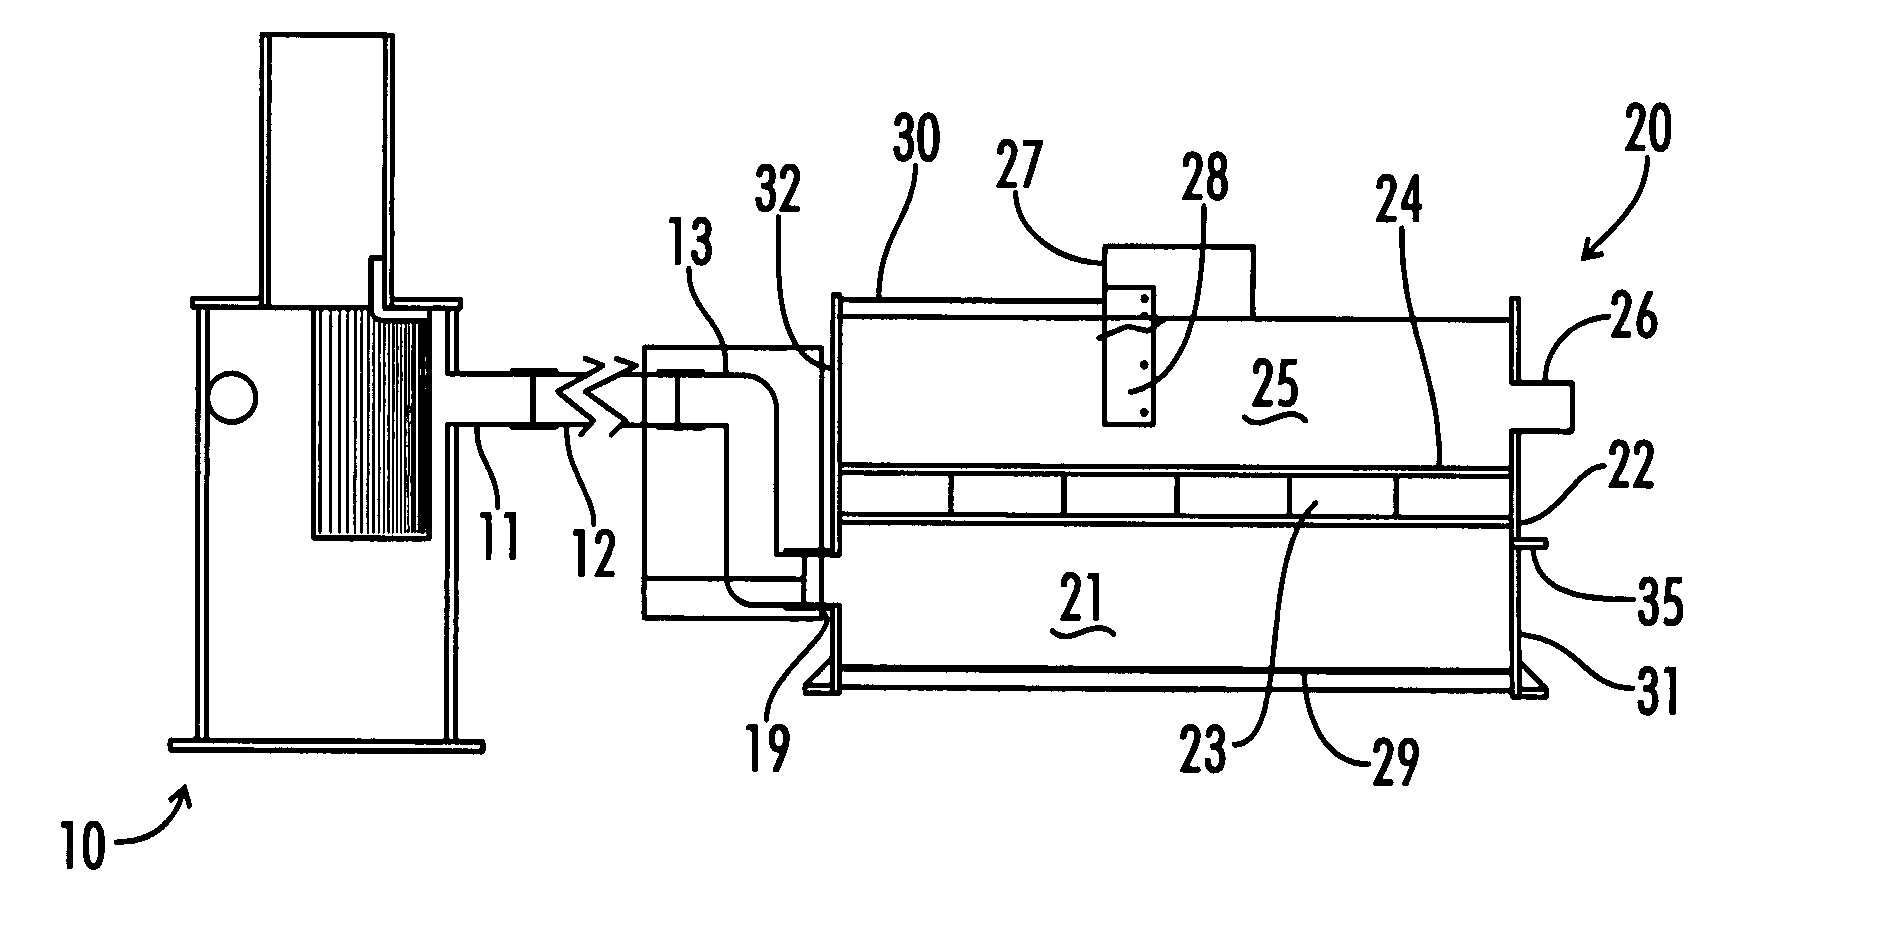 Upflow Filtration and Method Apparatus for Stormwater Treatment